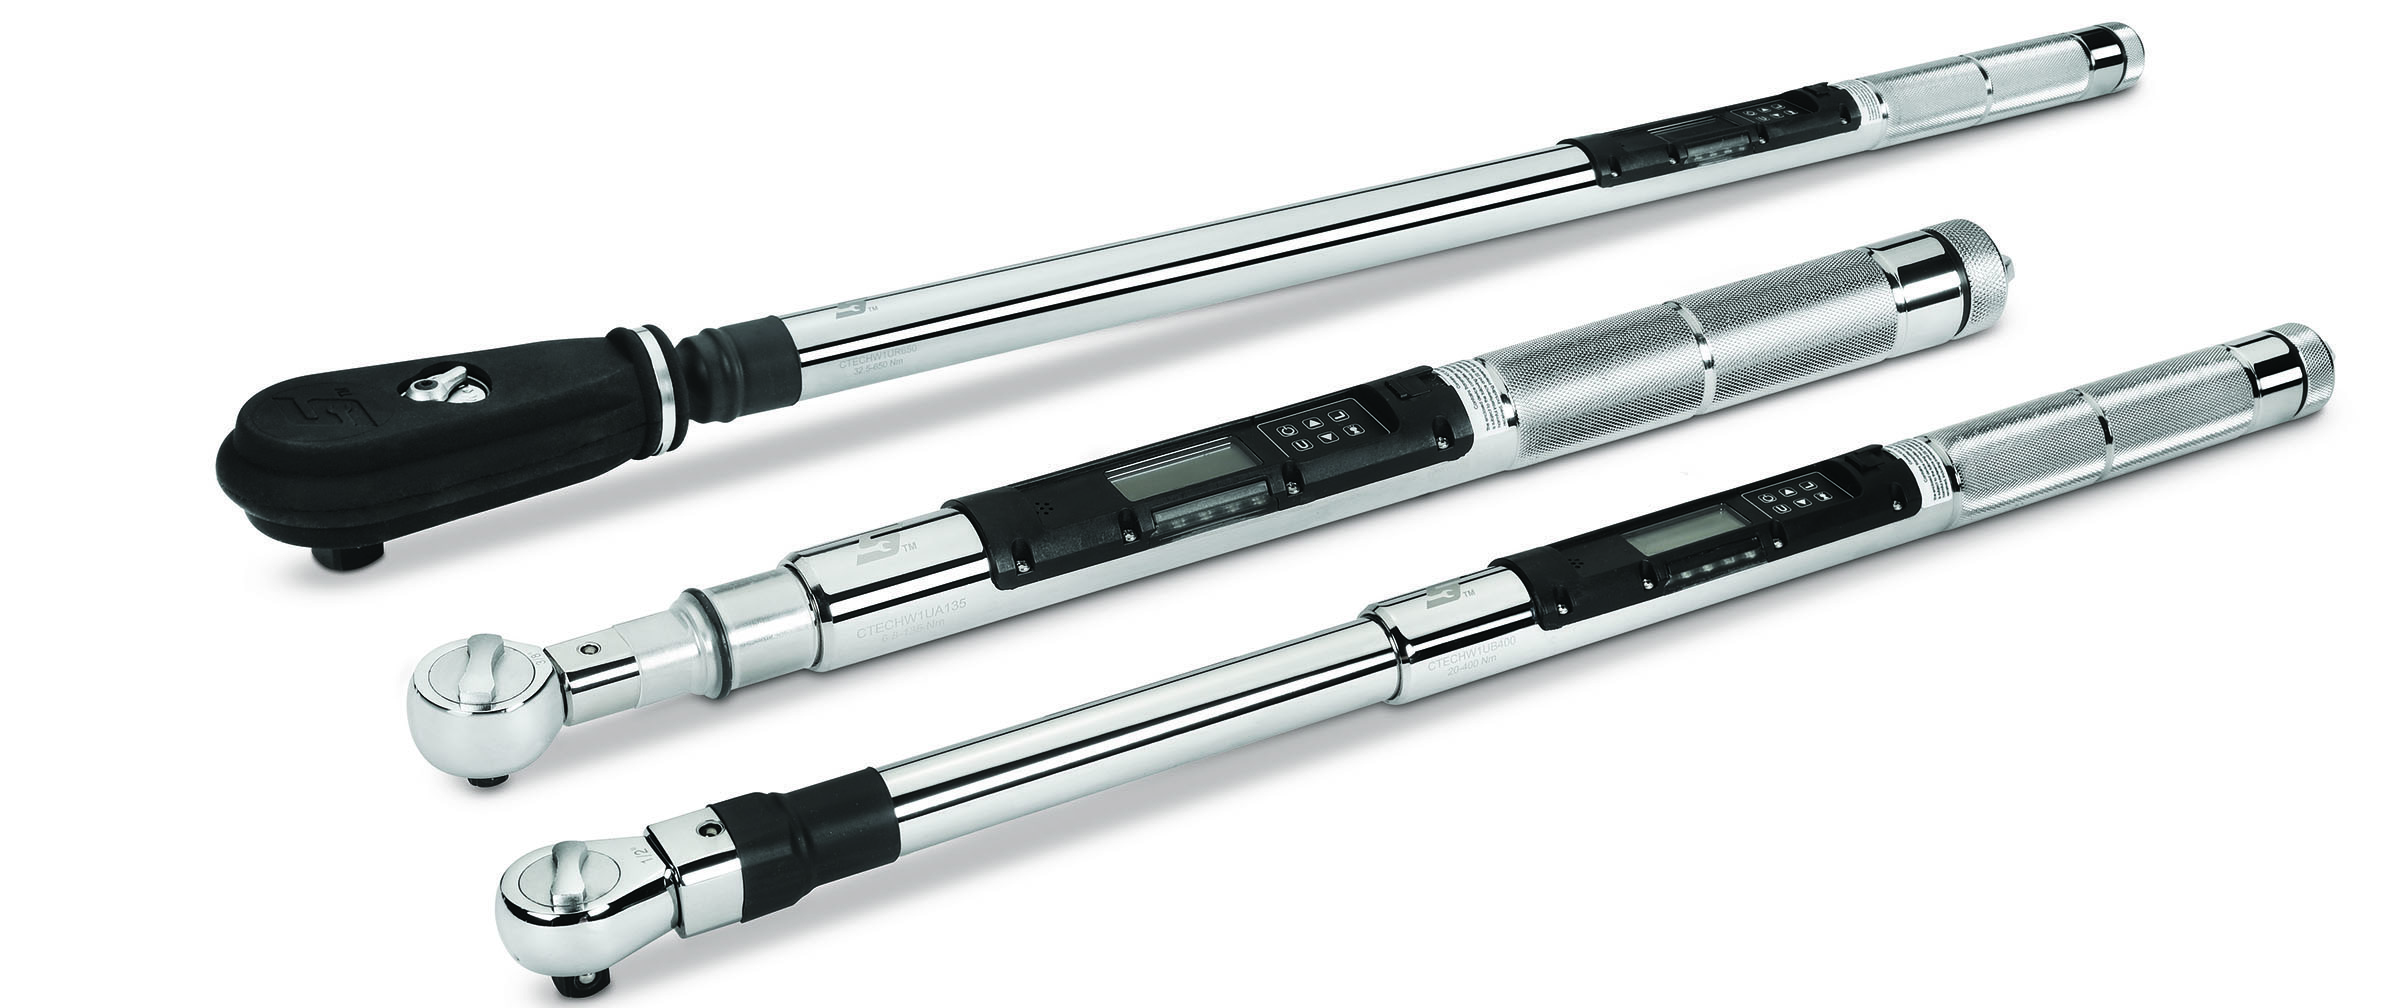 Snap-On torque wrenches made for harsh environments